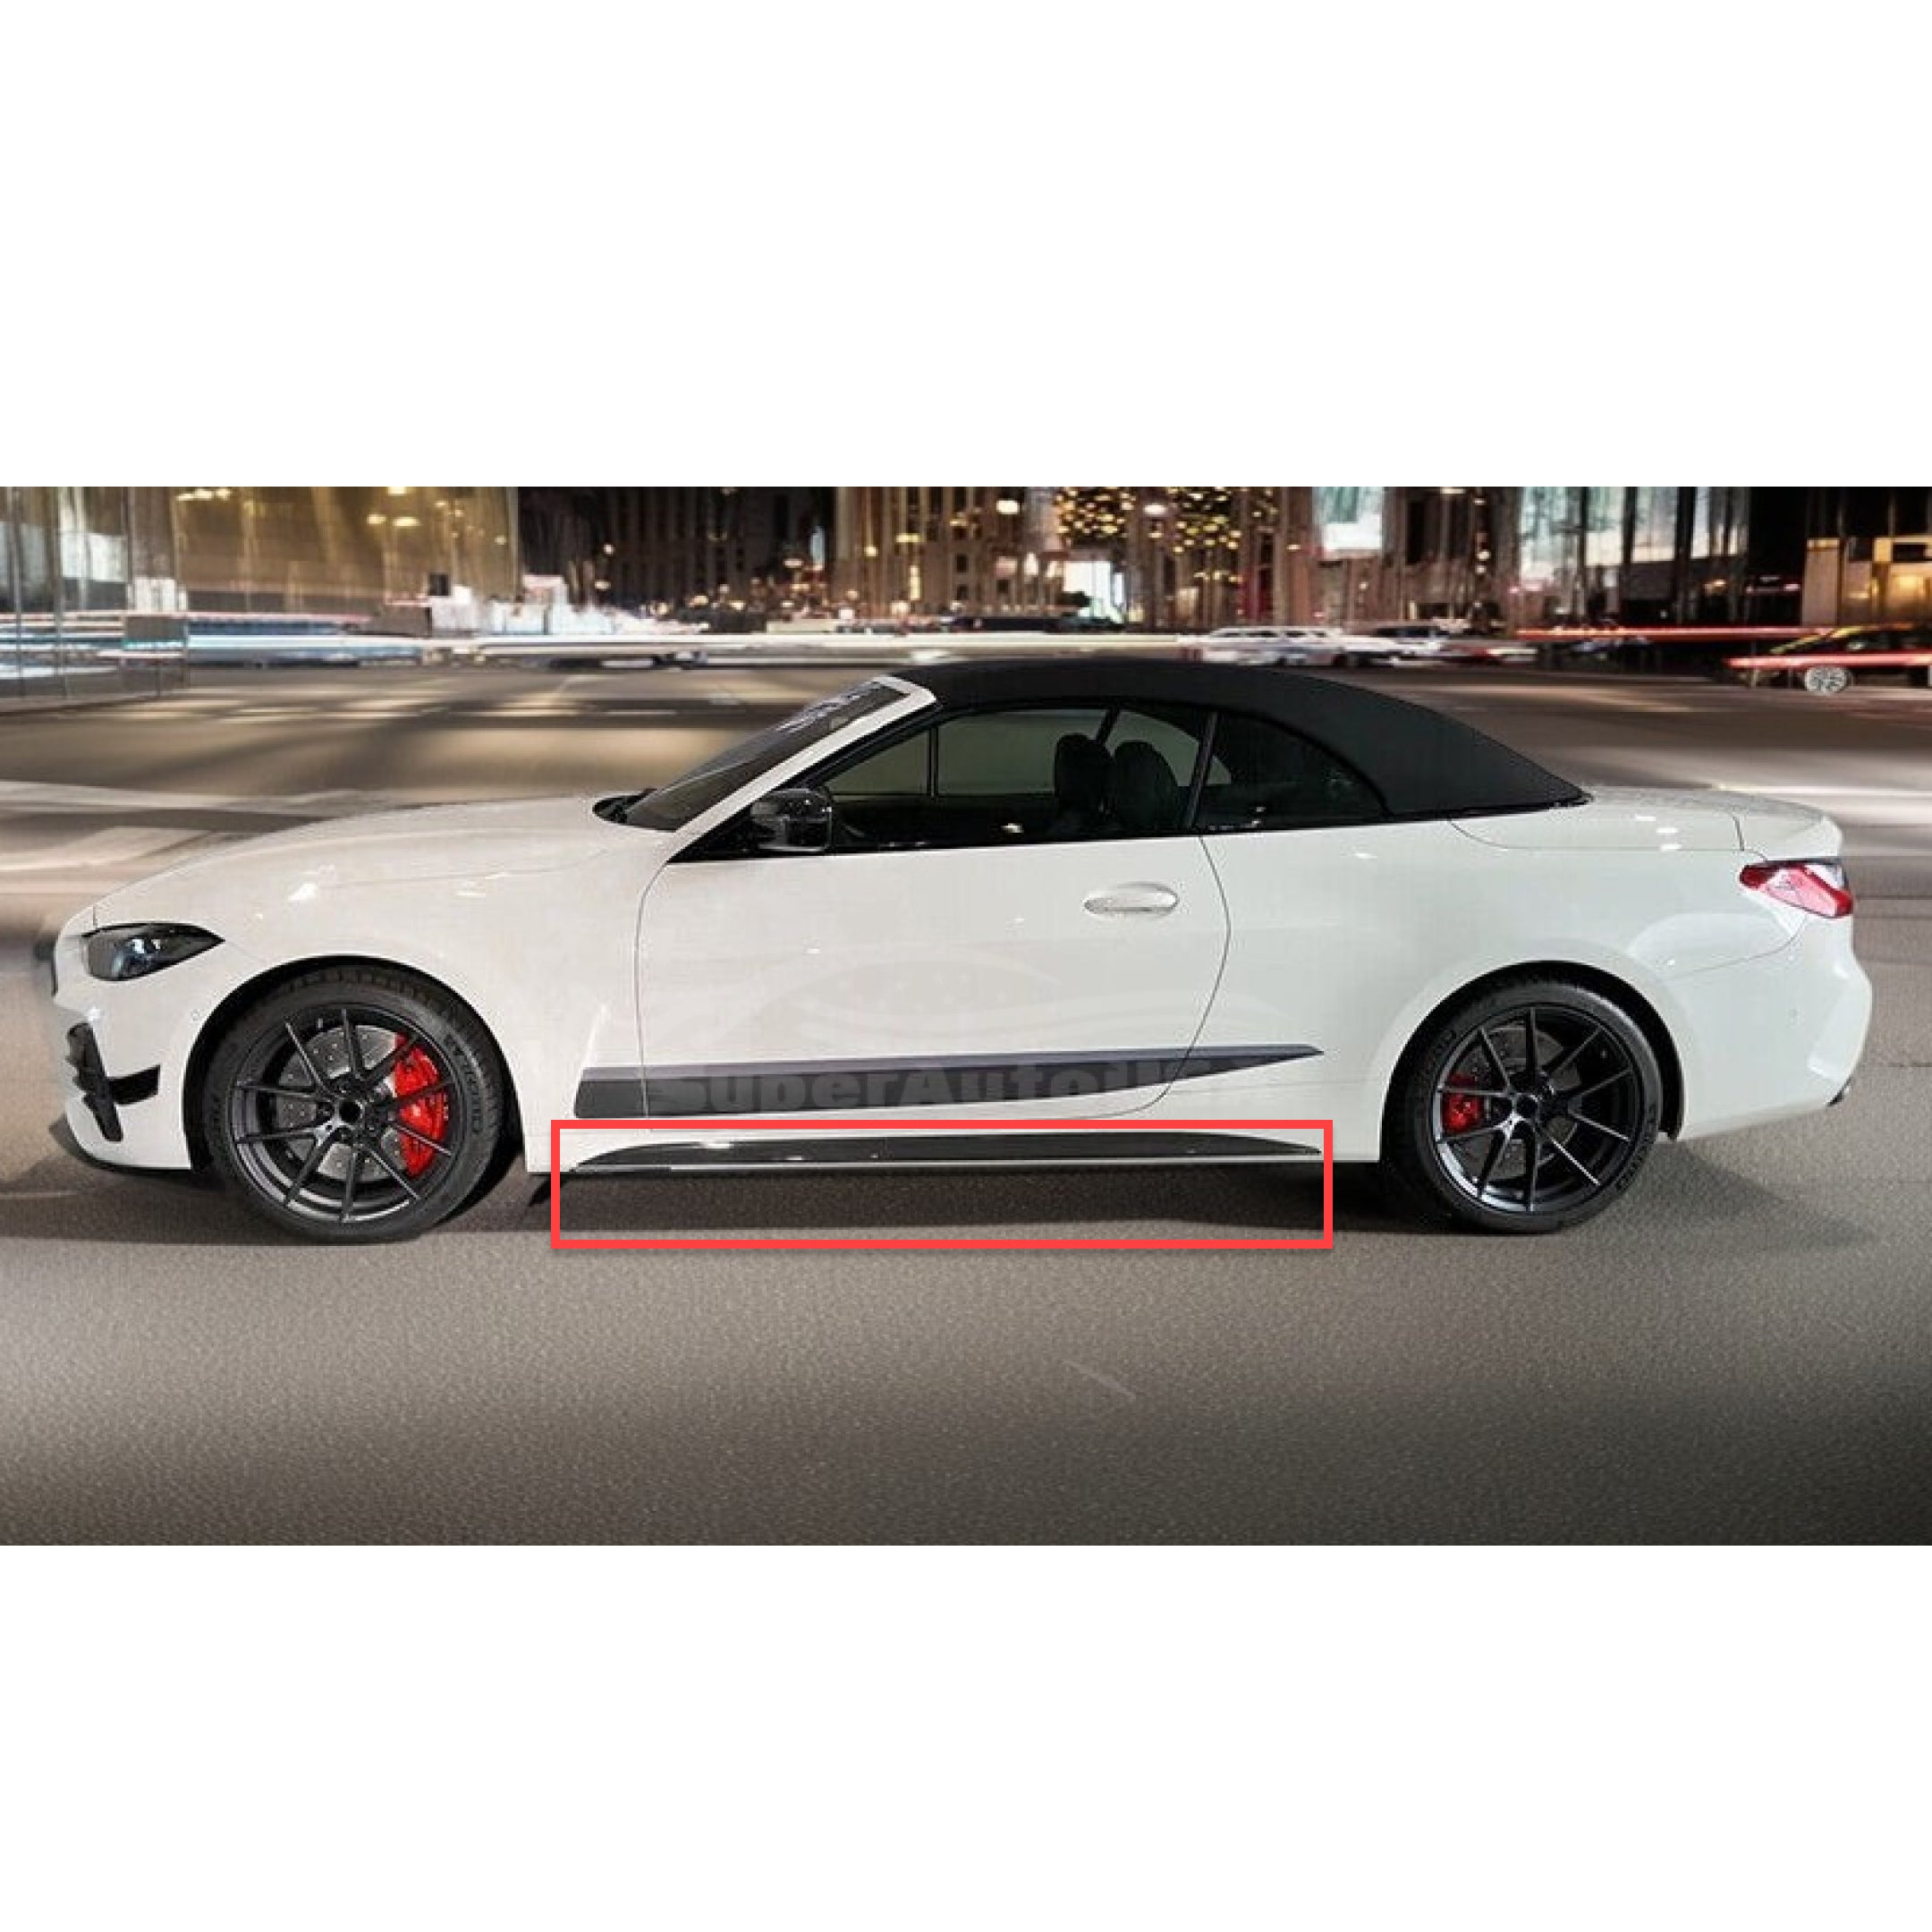 Gloss black side skirts fitted on a BMW 4 Series G22 G23, part of the comprehensive automobile exterior body kits, offering a bold visual upgrade.